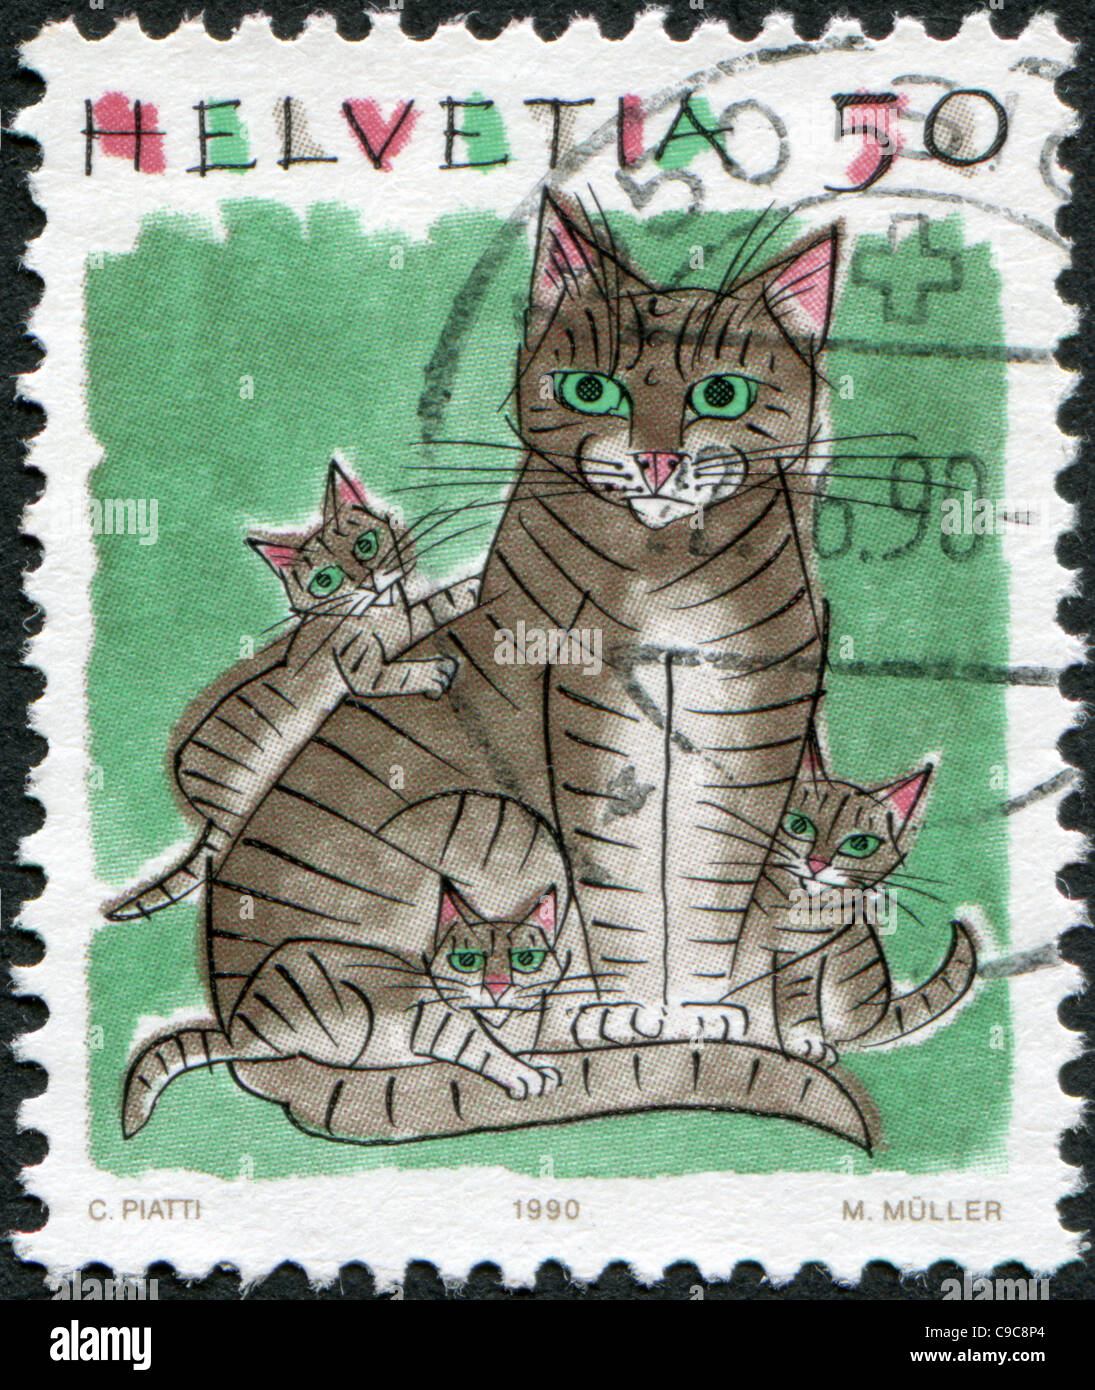 SWITZERLAND 1990: A stamp printed in Switzerland, shows a house cat Stock Photo